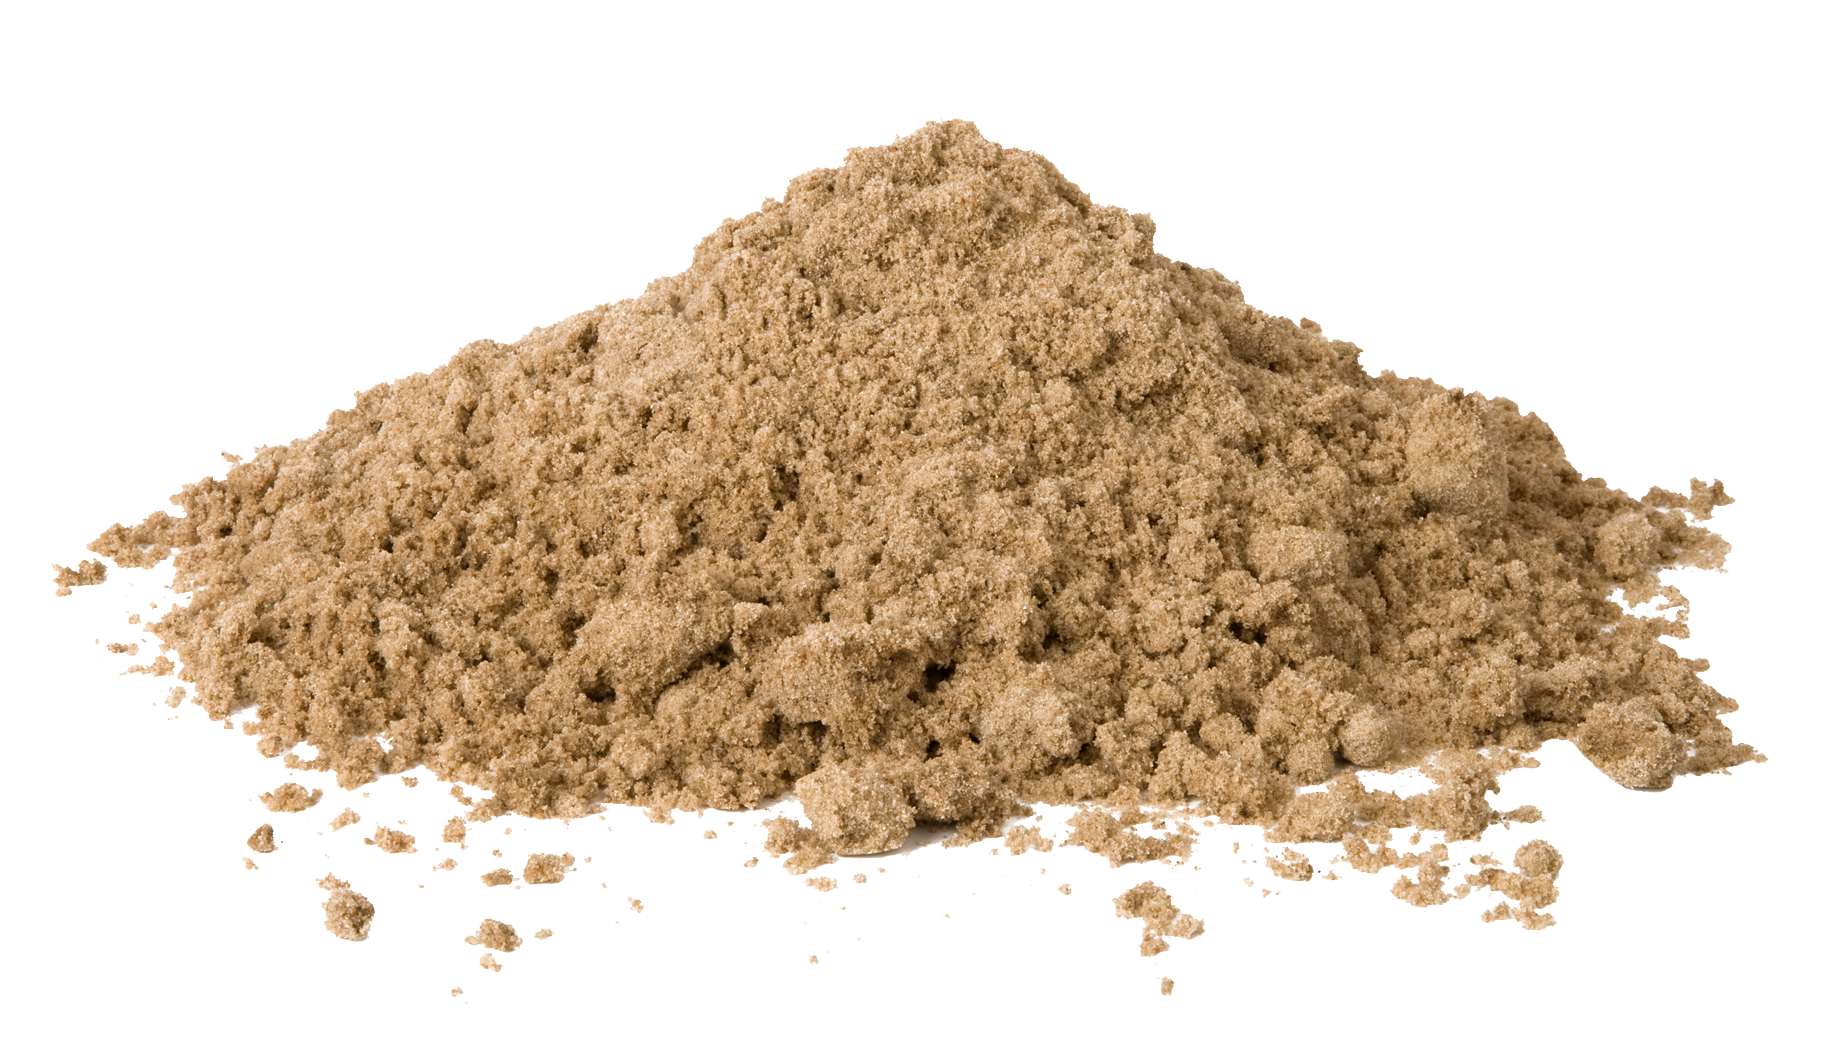 Sand PNG Free Download